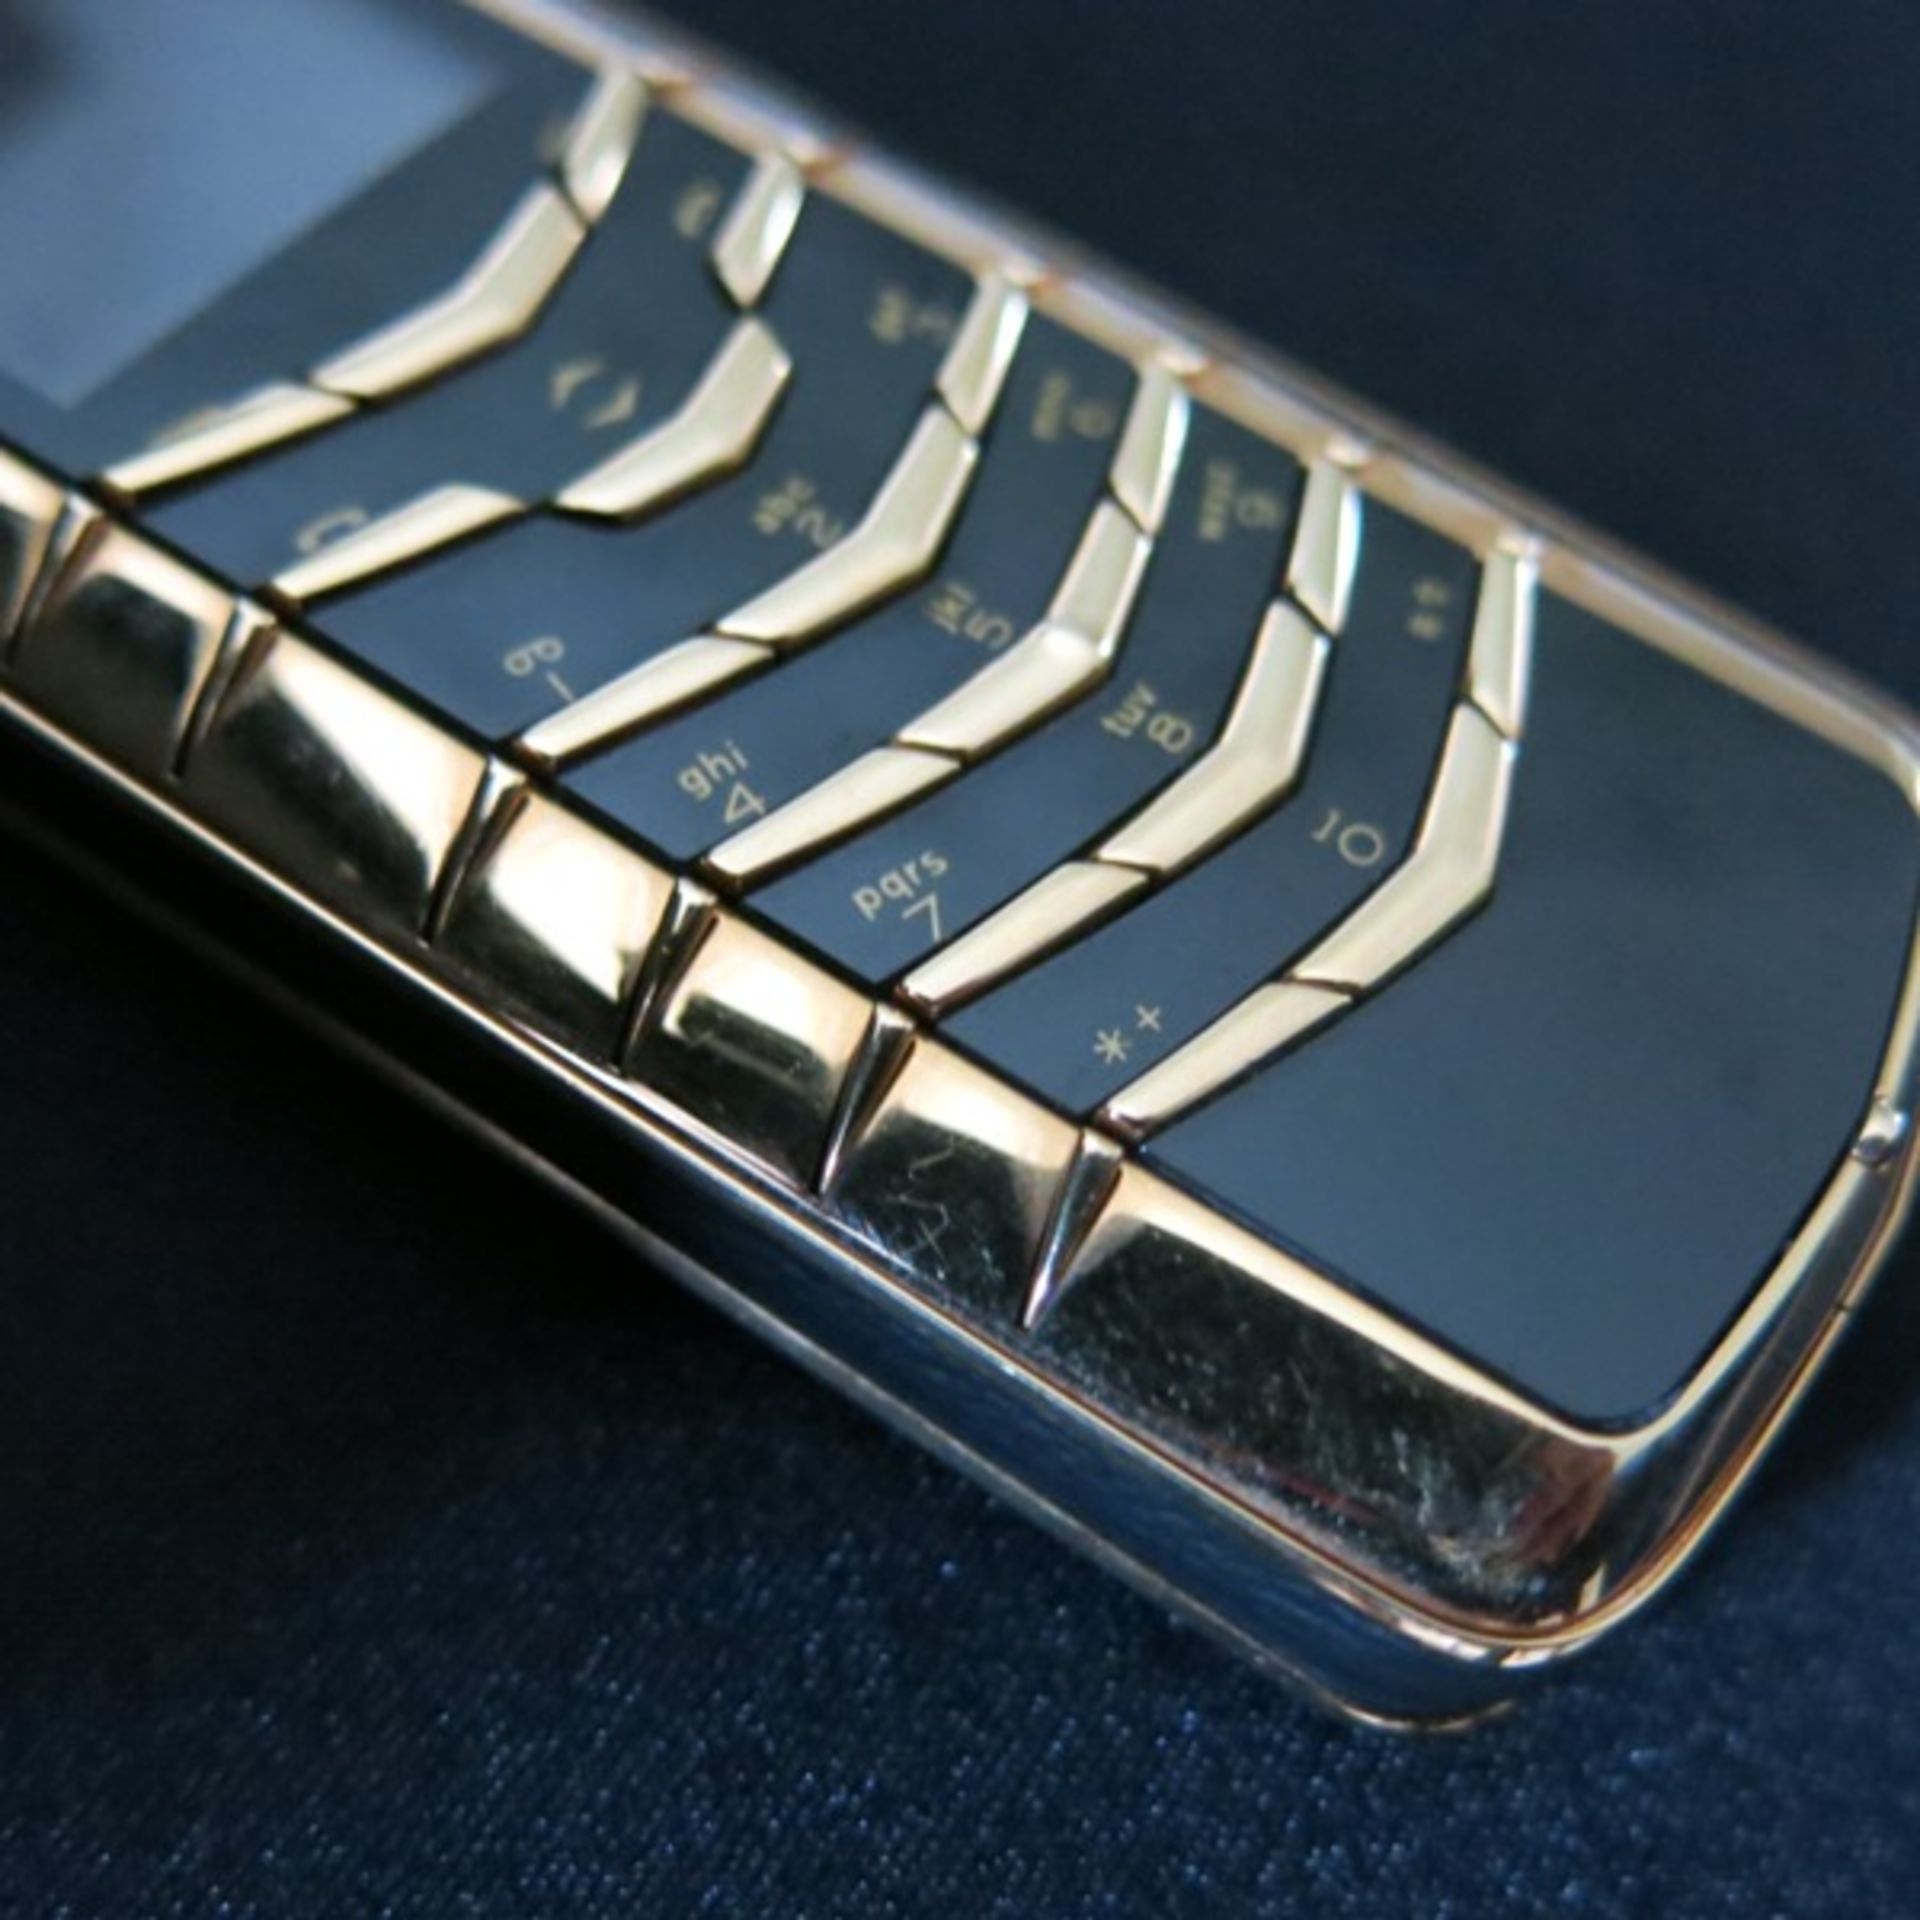 Vertu Signature Classic Phone in 18kt Brushed Yellow Gold with 18kt Polished Yellow Gold - Image 4 of 7